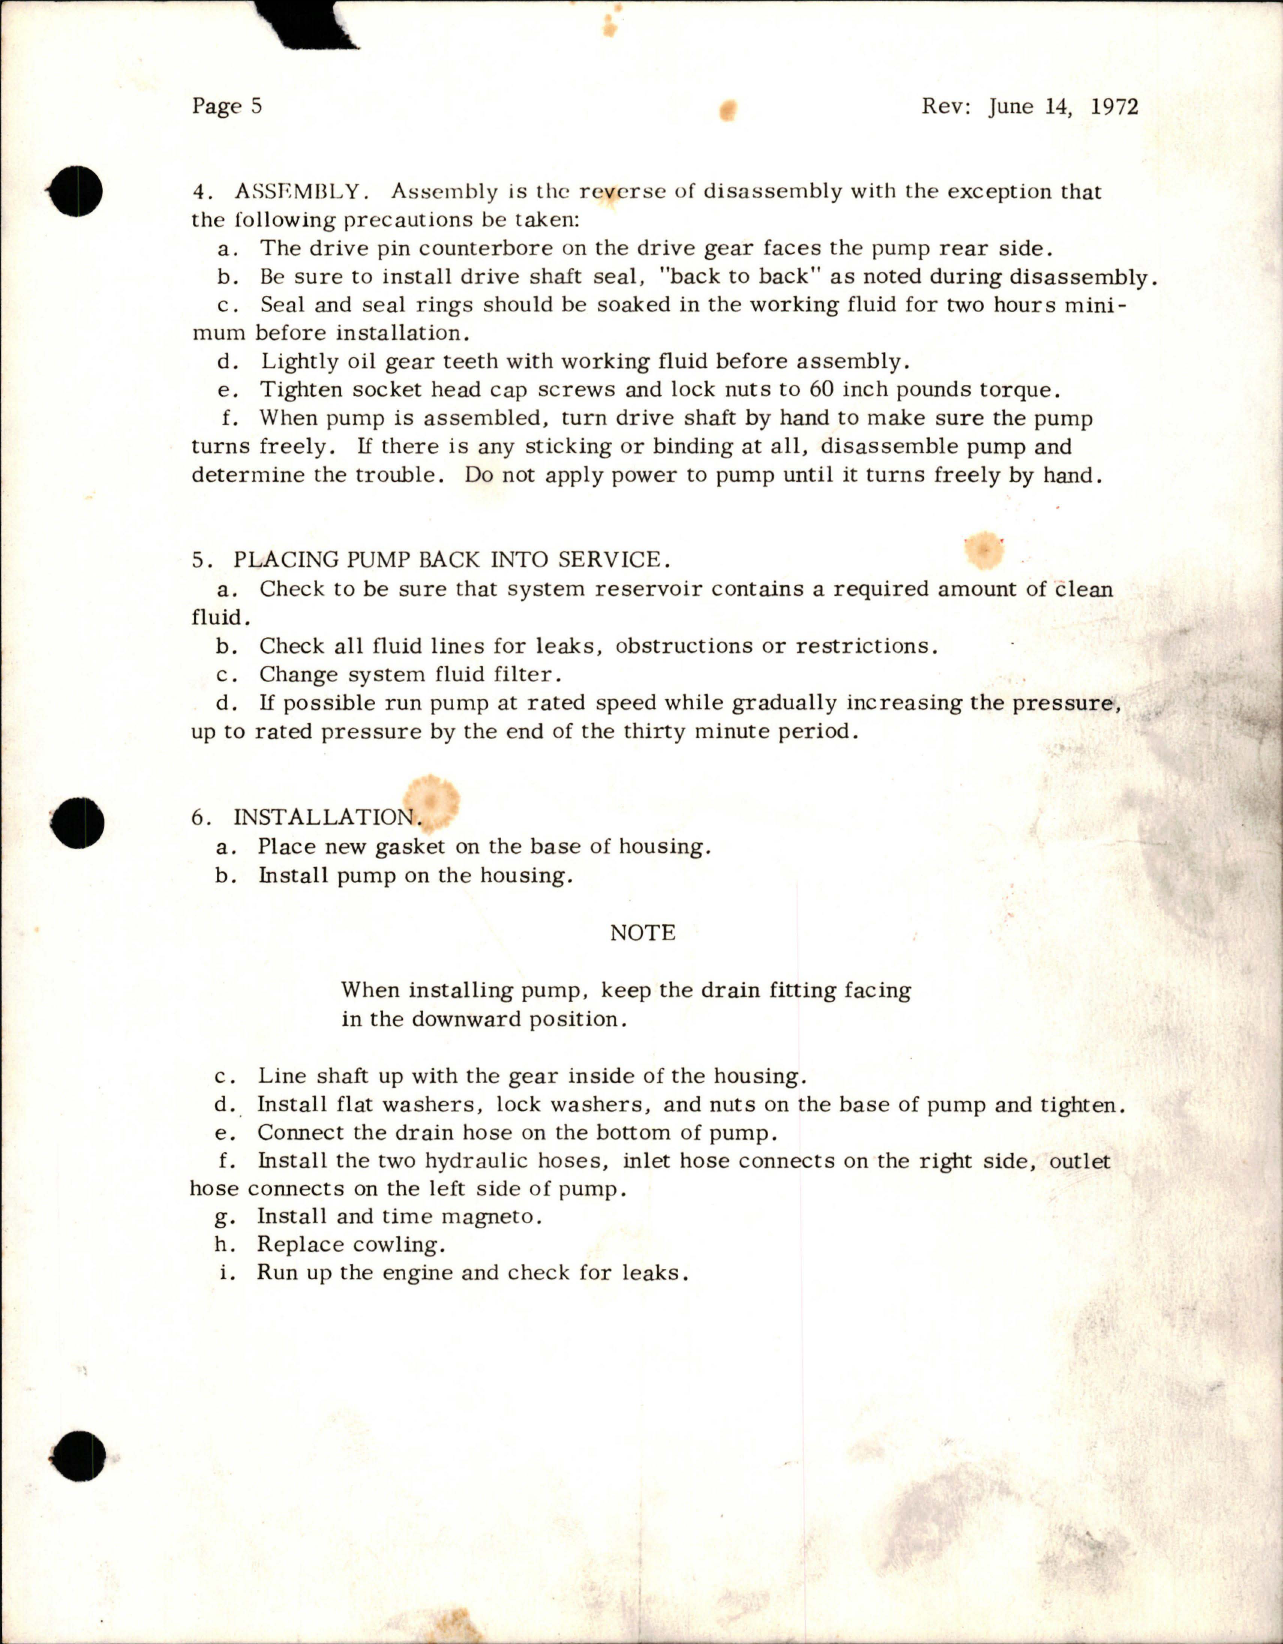 Sample page 7 from AirCorps Library document: Overhaul Instructions for Eastern Industries Hydraulic Pumps